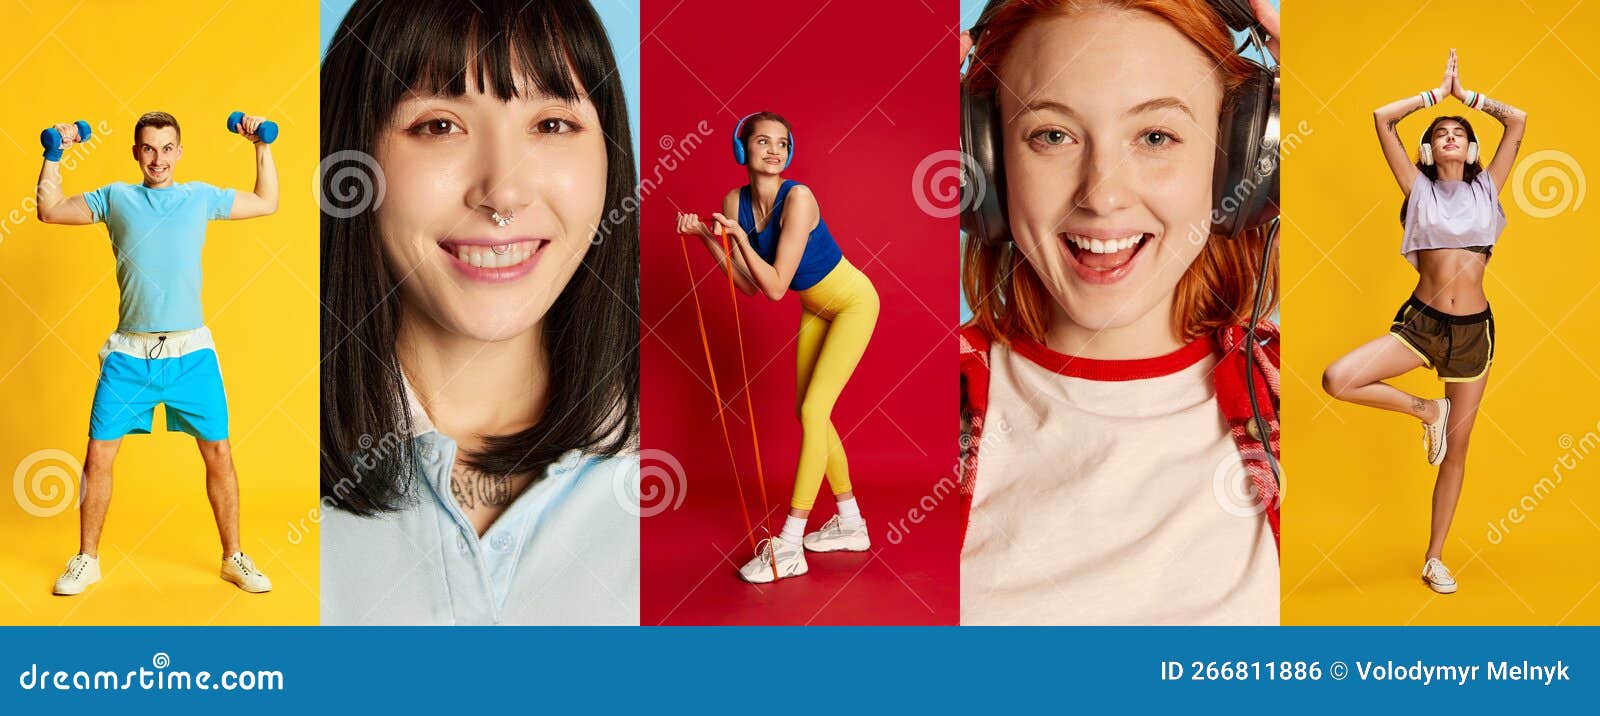 collage of different young people, man and women over multicolored background. sport and music. happy and delightful